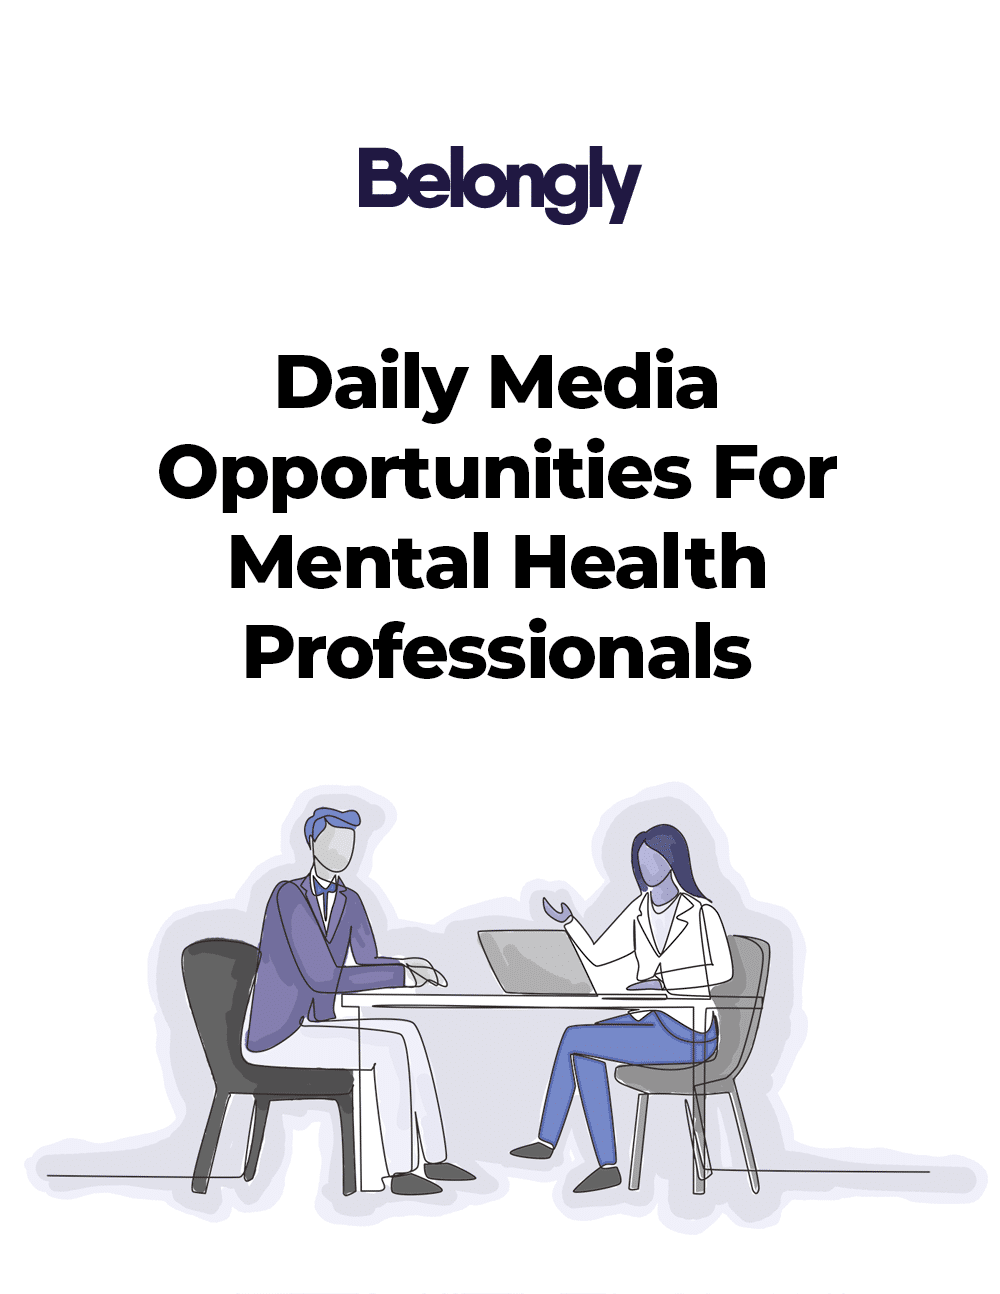 Daily Media Opportunities For Mental Health Professionals